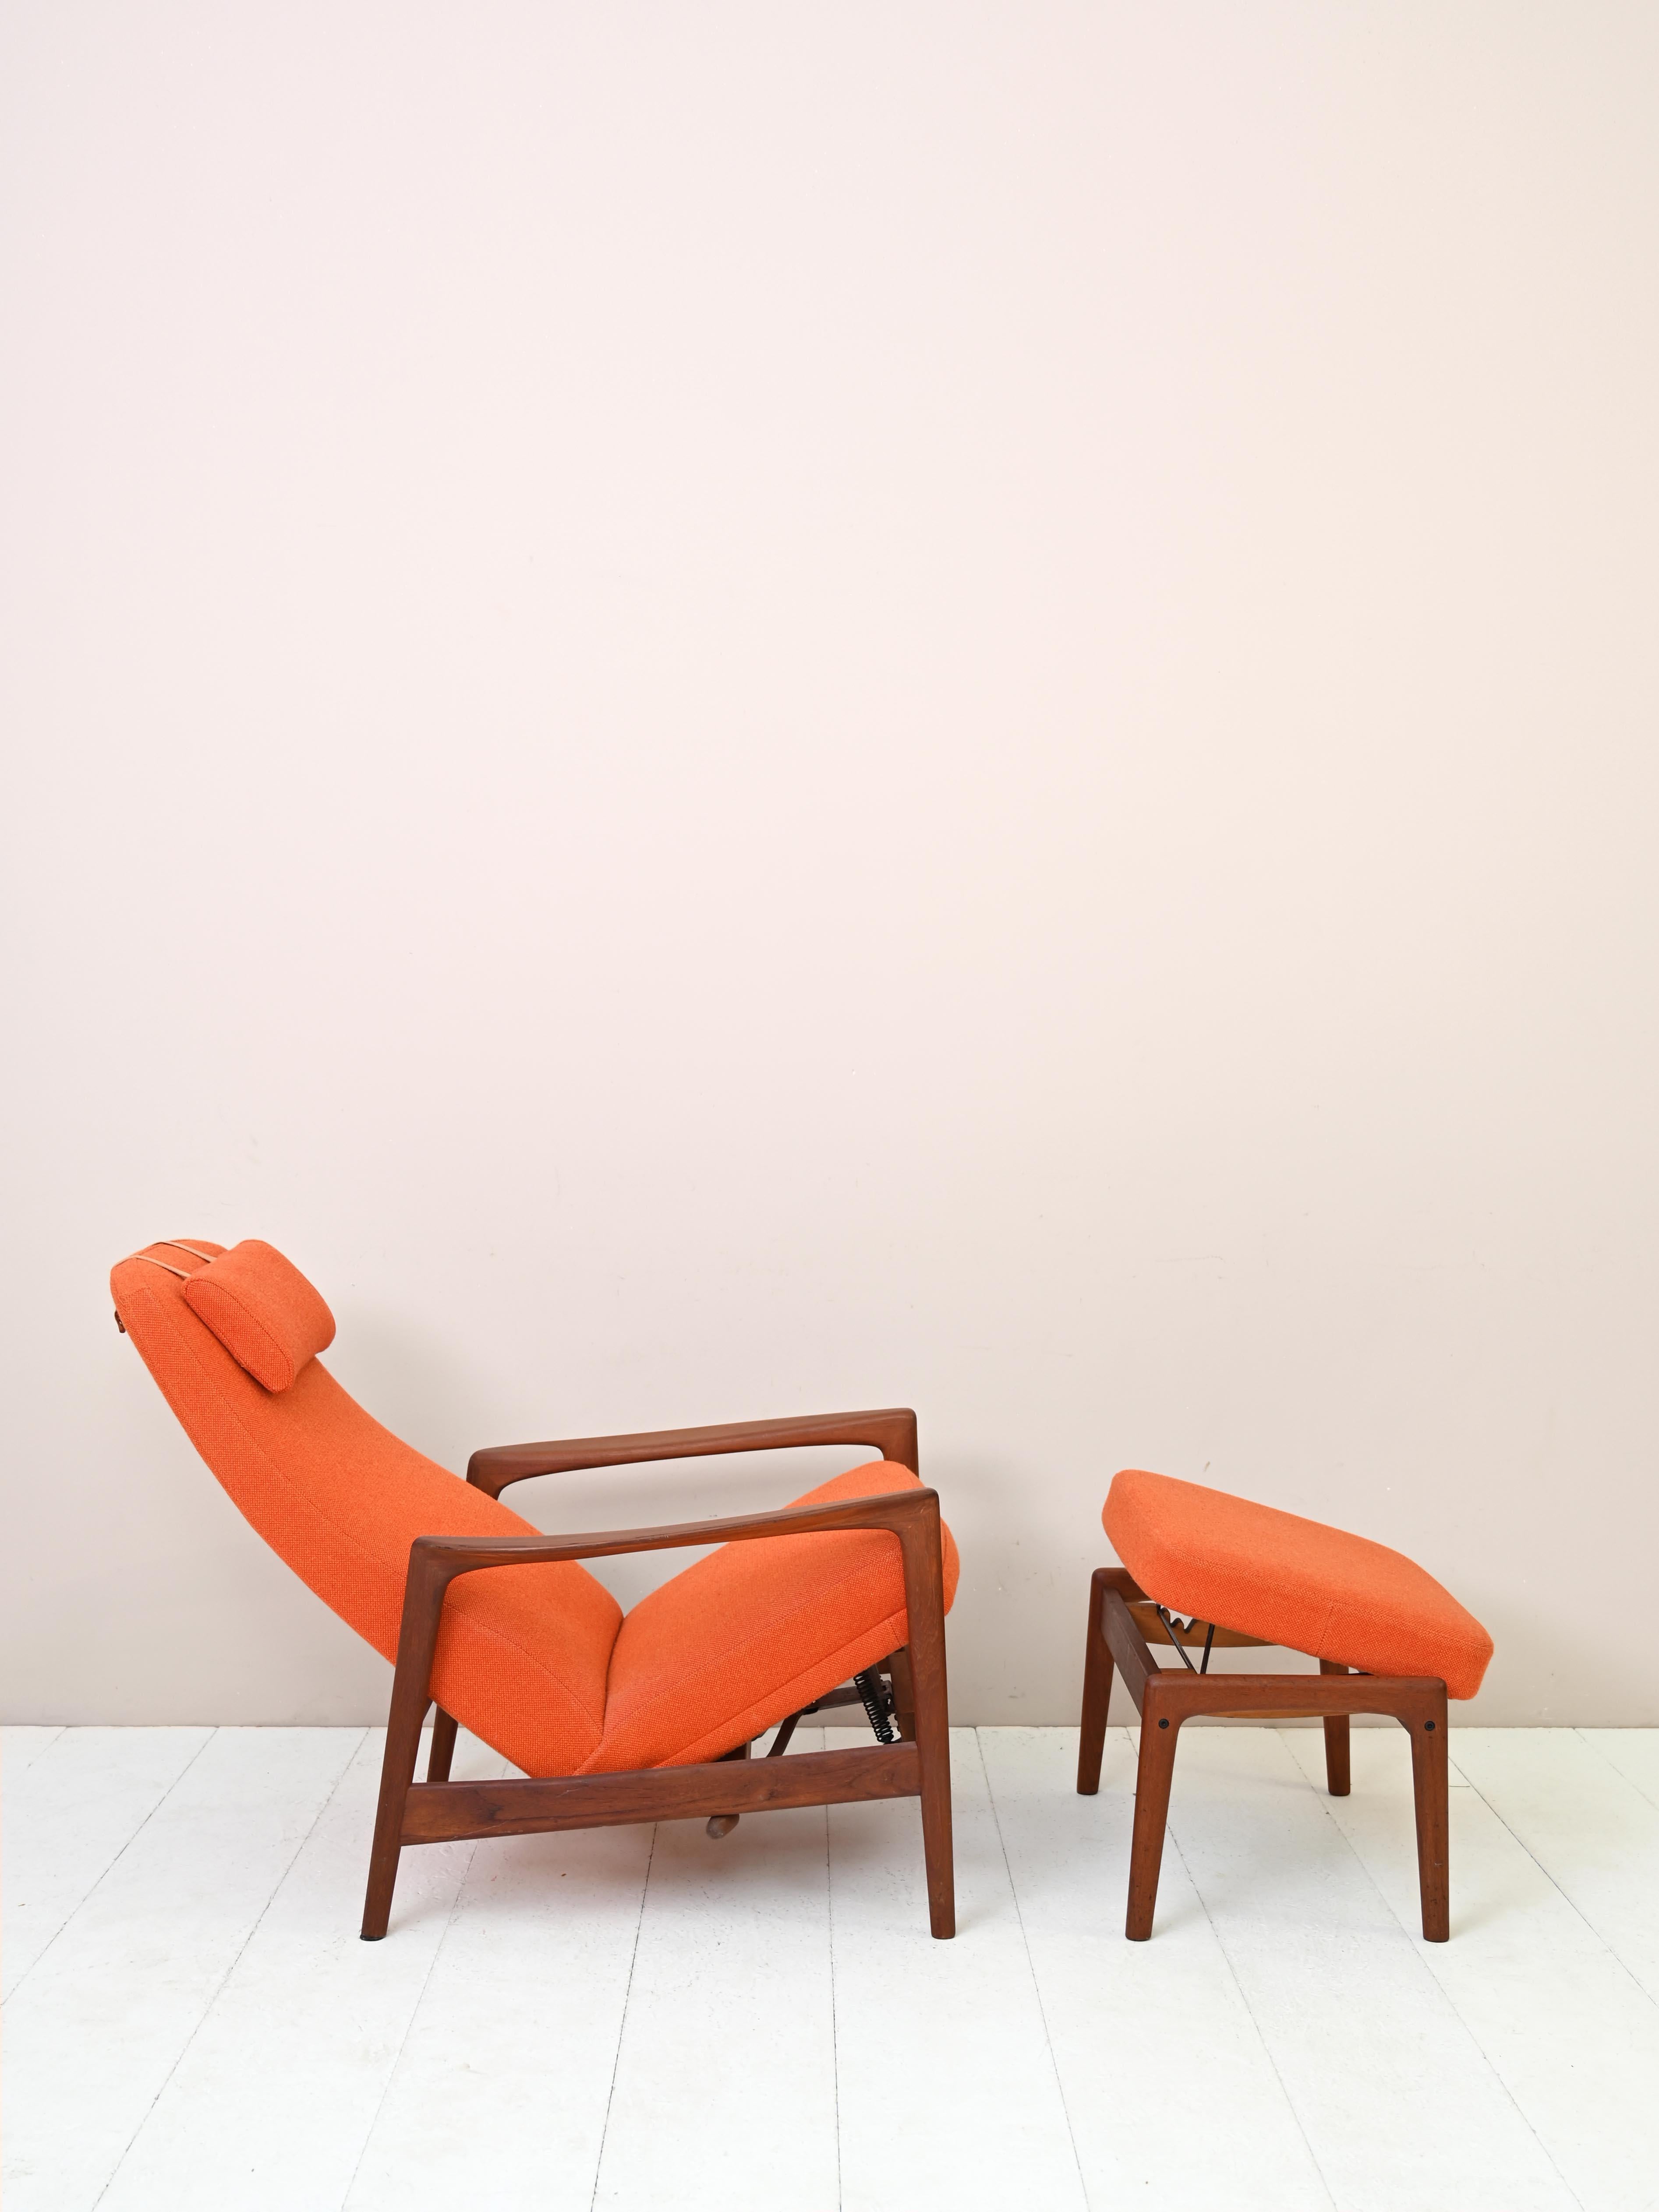 Vintage 1960s armchair with footstool.
 
Mid-century Scandinavian recliner armchair by Folke Ohlsson for DUX.
Upholstered in original orange fabric with solid teak frame.
The chair can be placed upright or reclined, and the ottoman can be